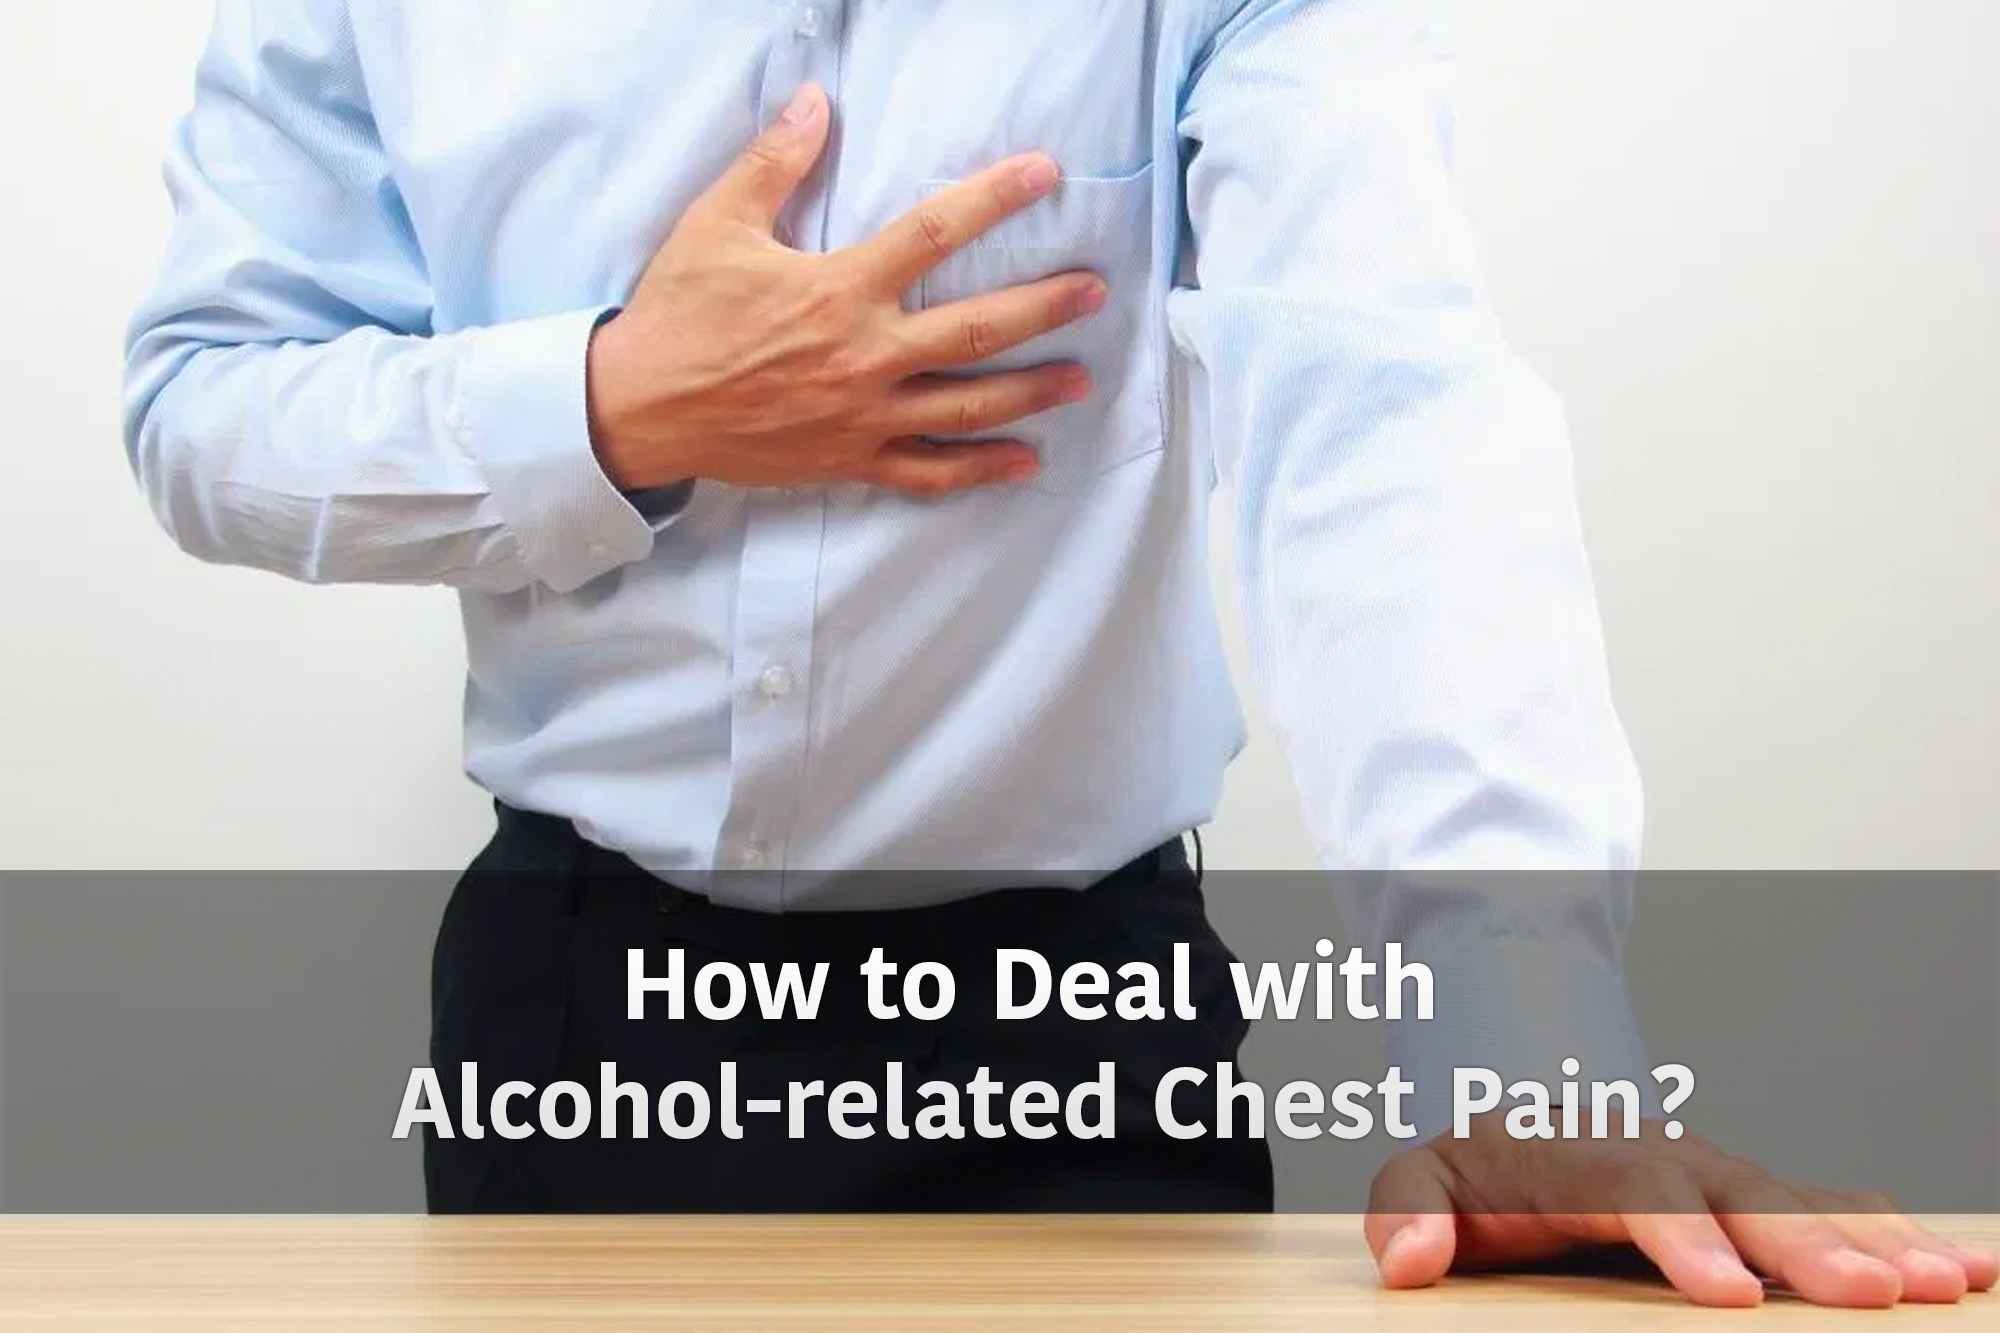 How to Deal with Alcohol-related Chest Pain